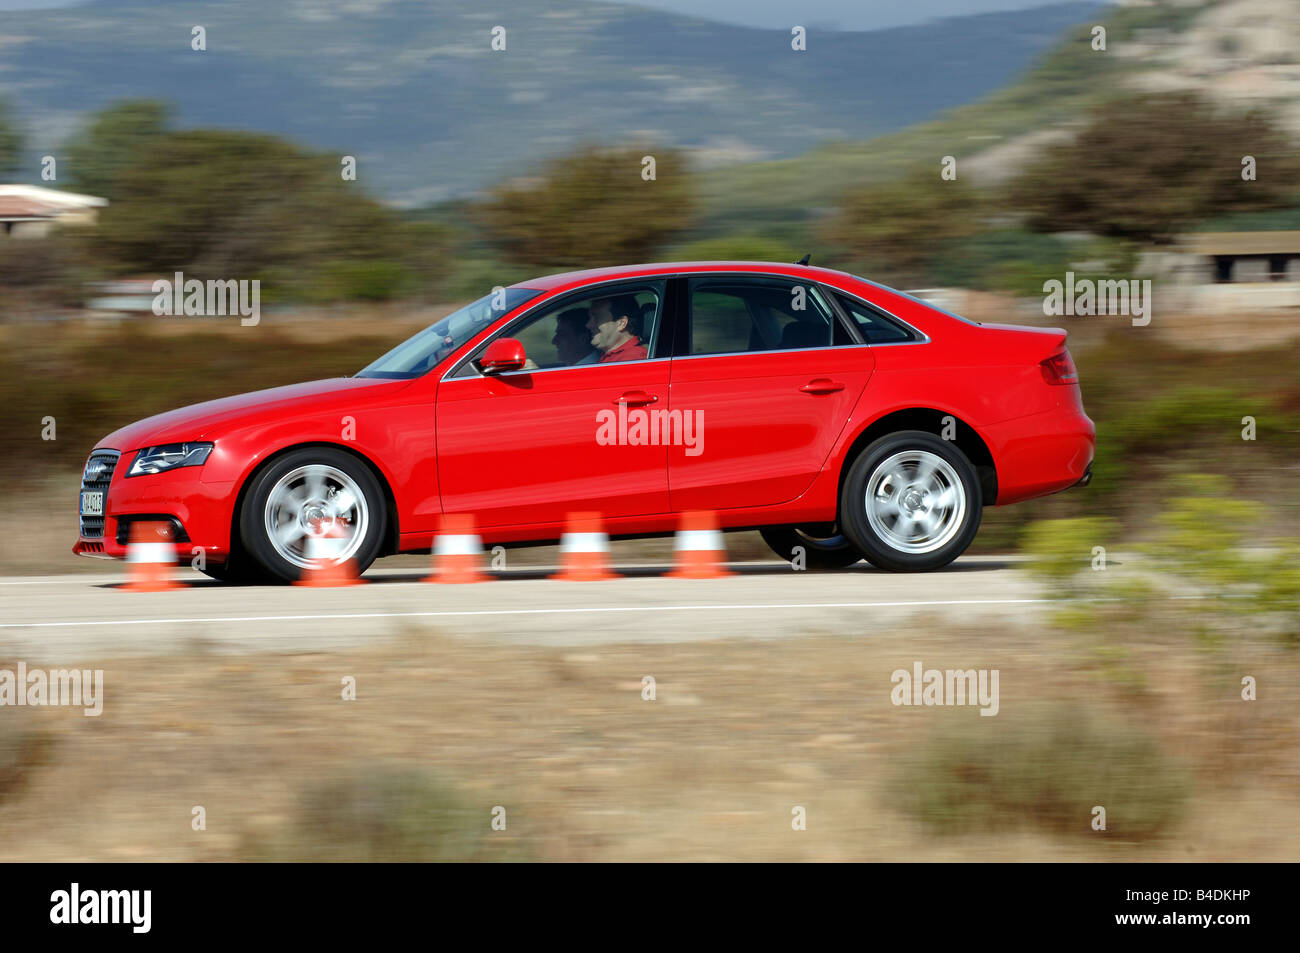 Audi A4 1.8 TFSI Ambition, model year 2007-, red, driving, side view, Pilonen, Test track Stock Photo